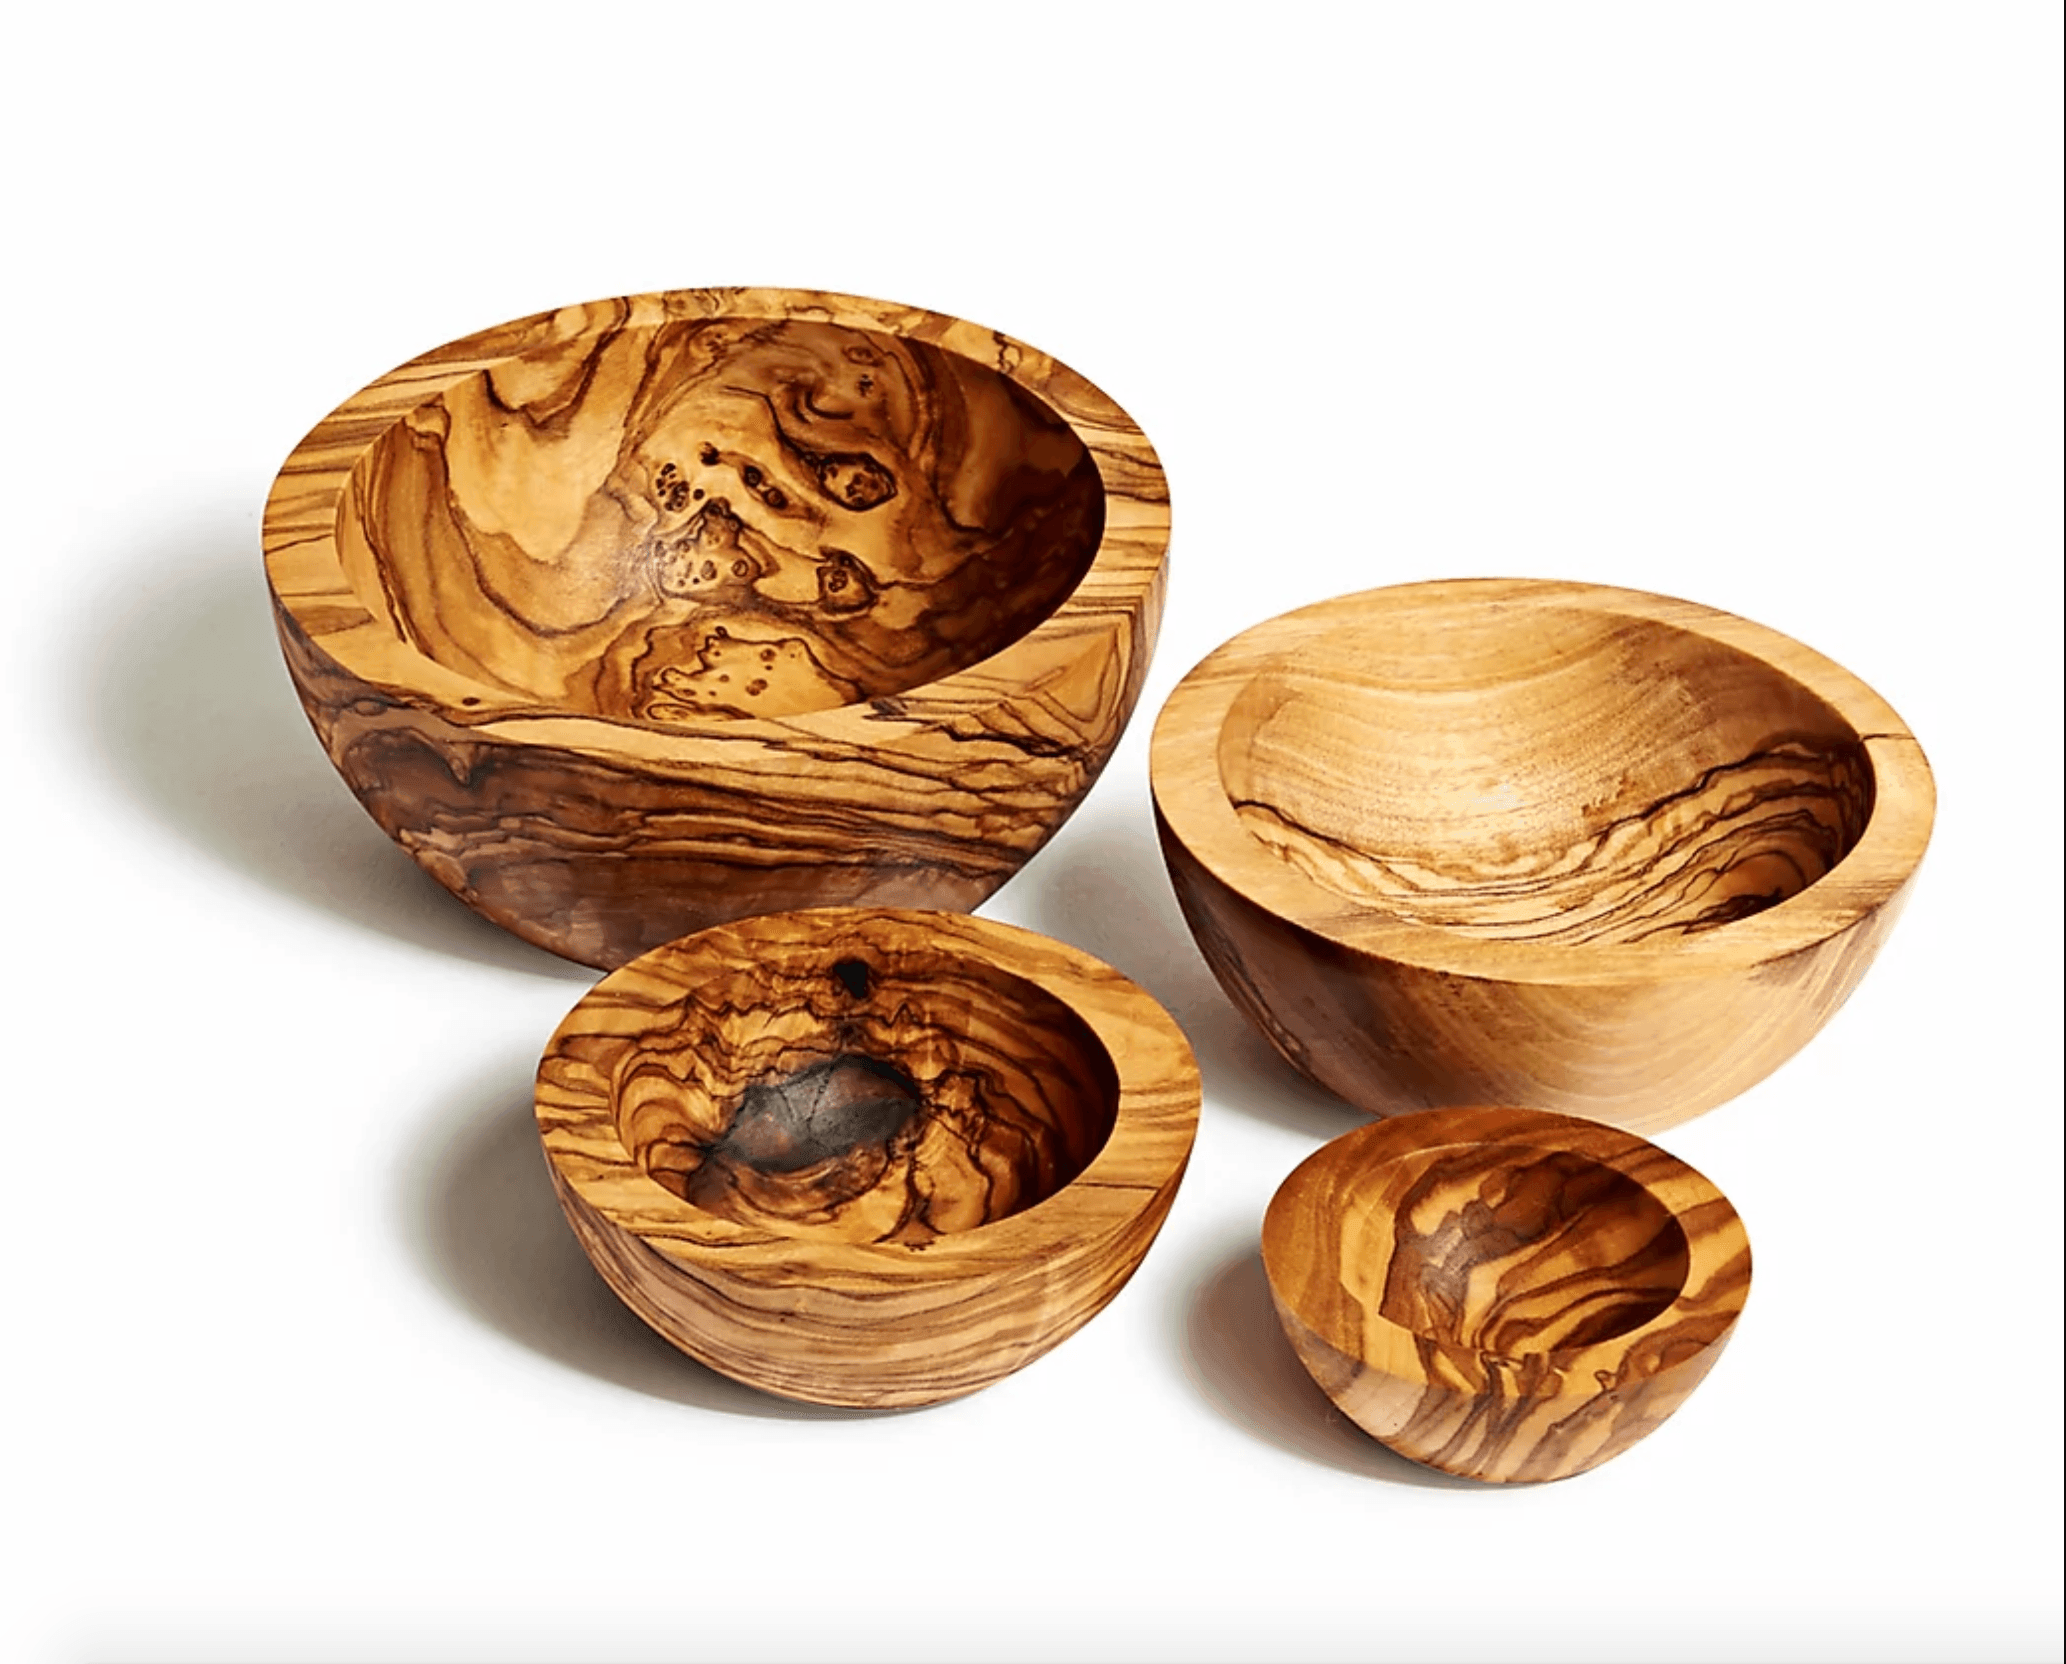 Wood Nesting Bowls - Why and Whale